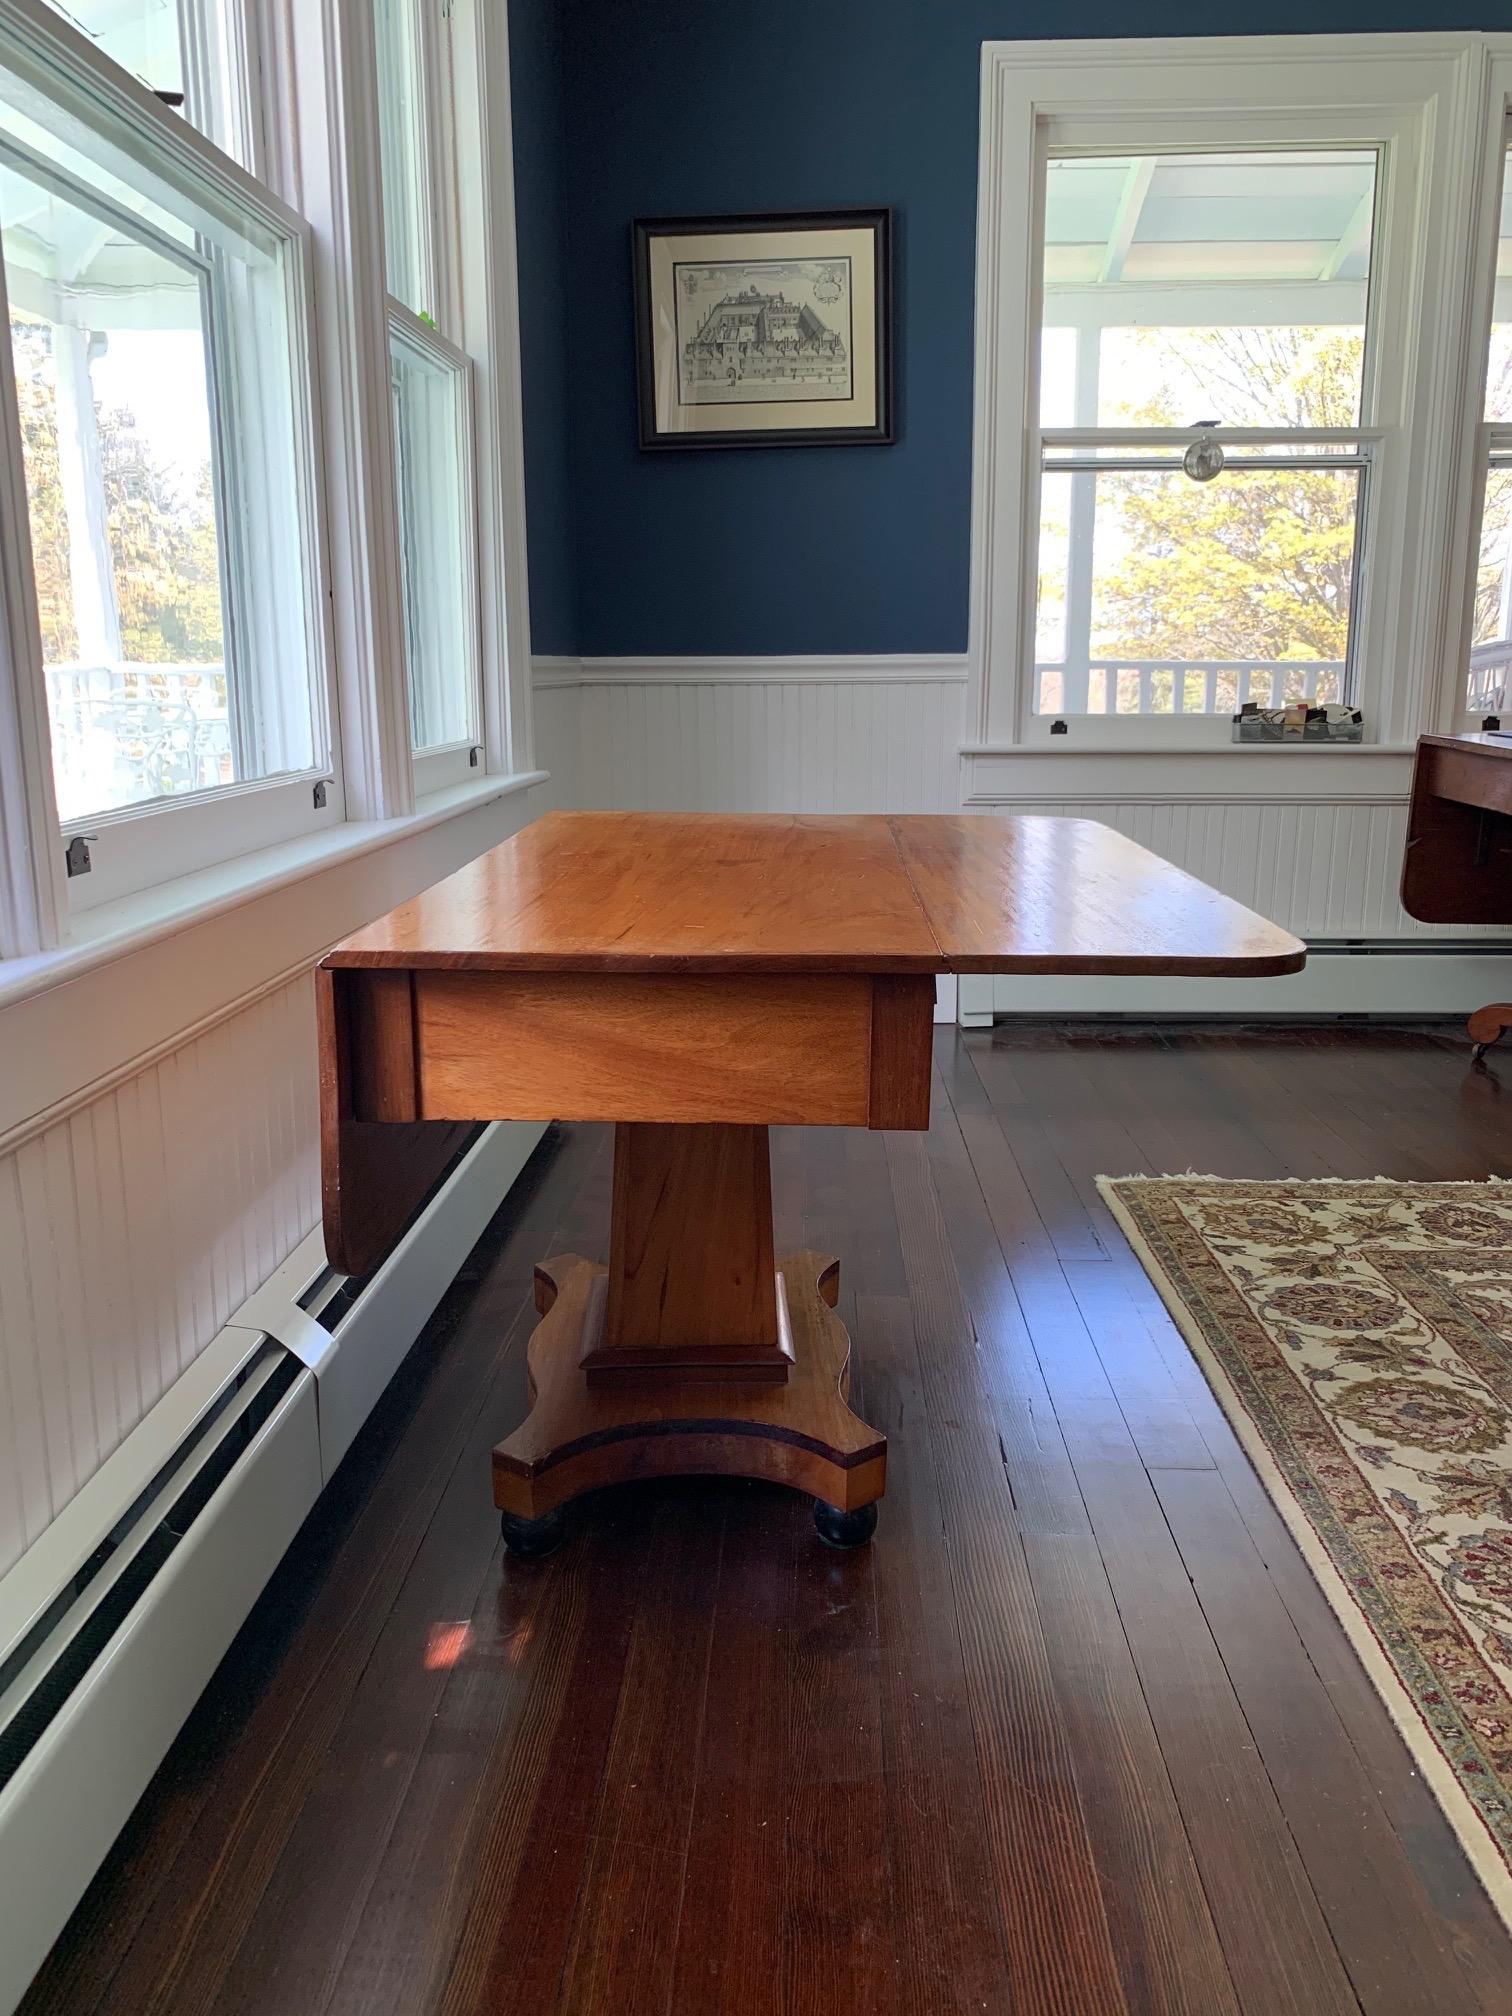 American Empire Drop Leaf Table, c. 1880 by S. K. Pierce & Son, Co. For Sale 12